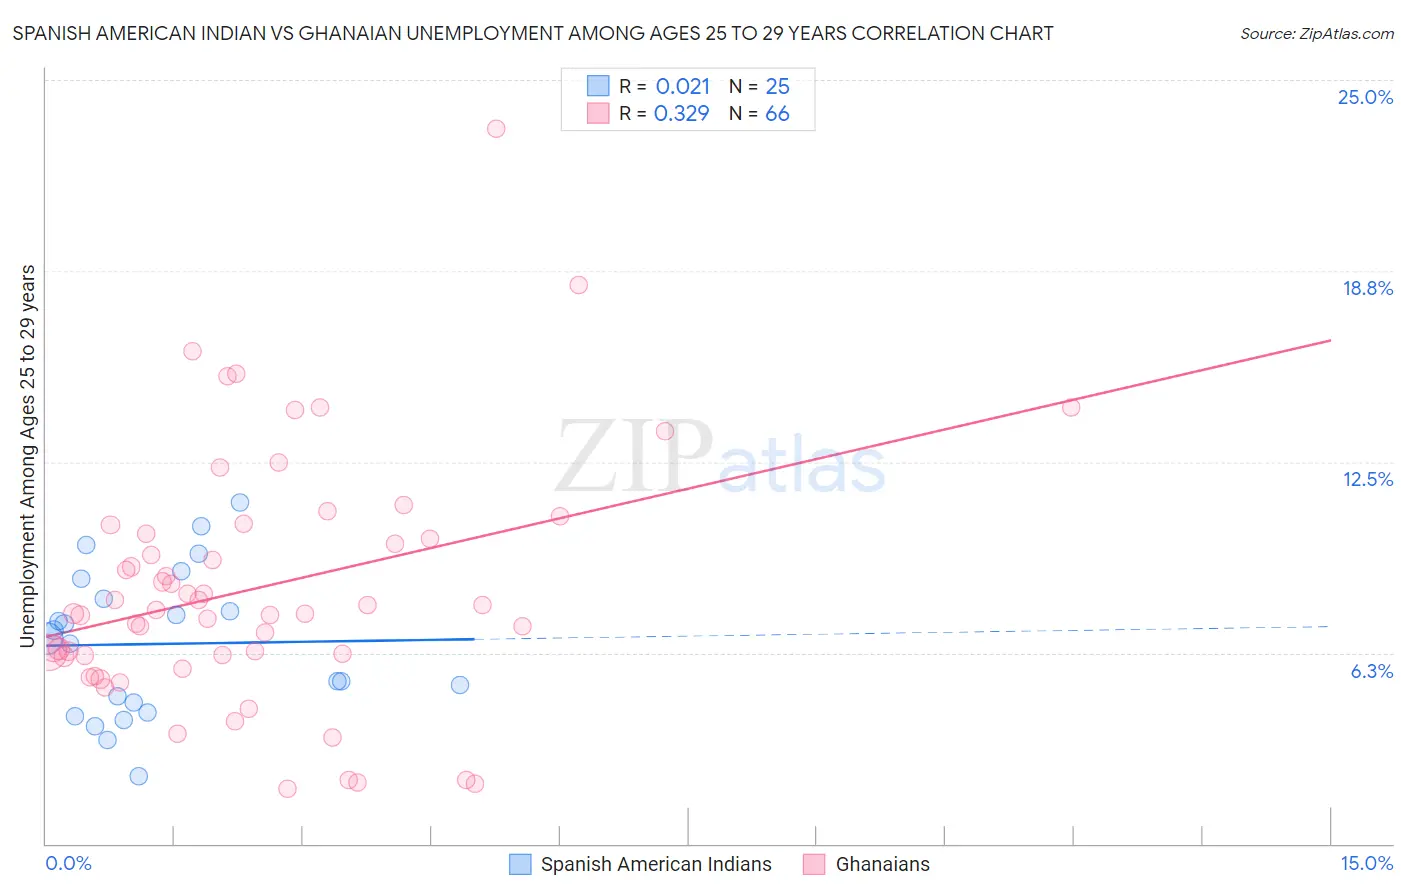 Spanish American Indian vs Ghanaian Unemployment Among Ages 25 to 29 years